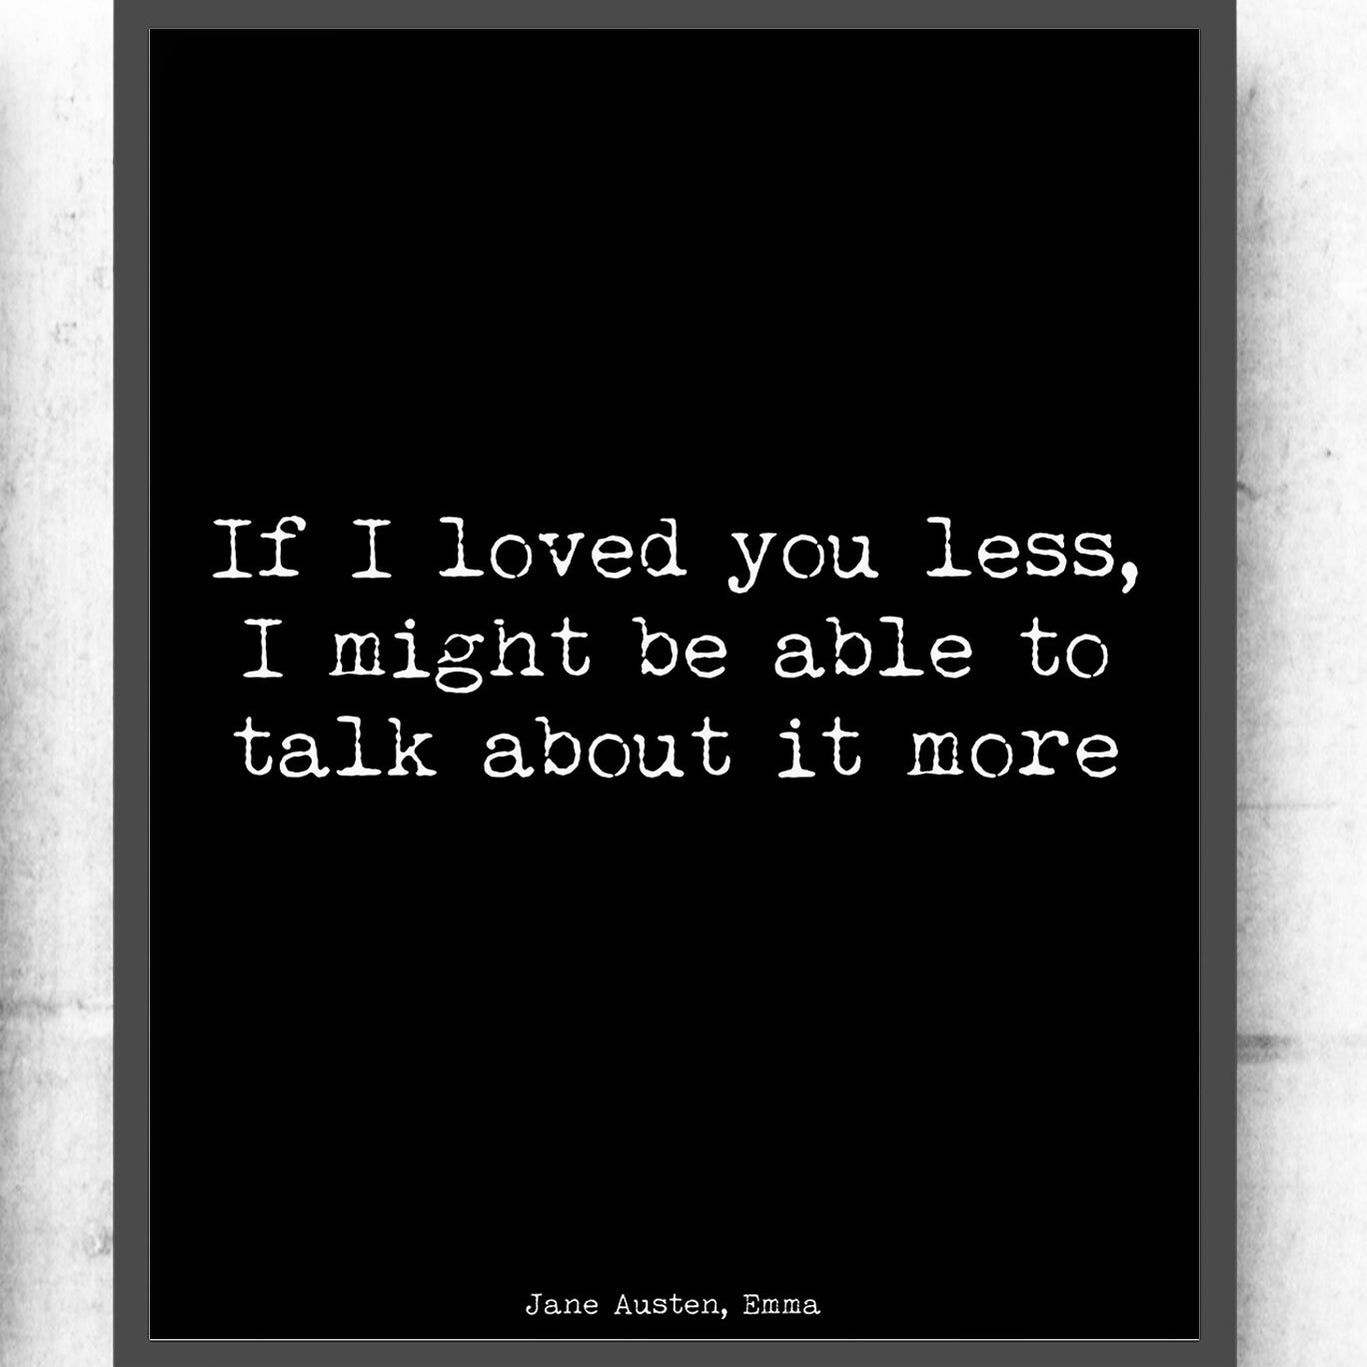 Jane Austen Quote Print, Emma Book Print - If I Loved You Less